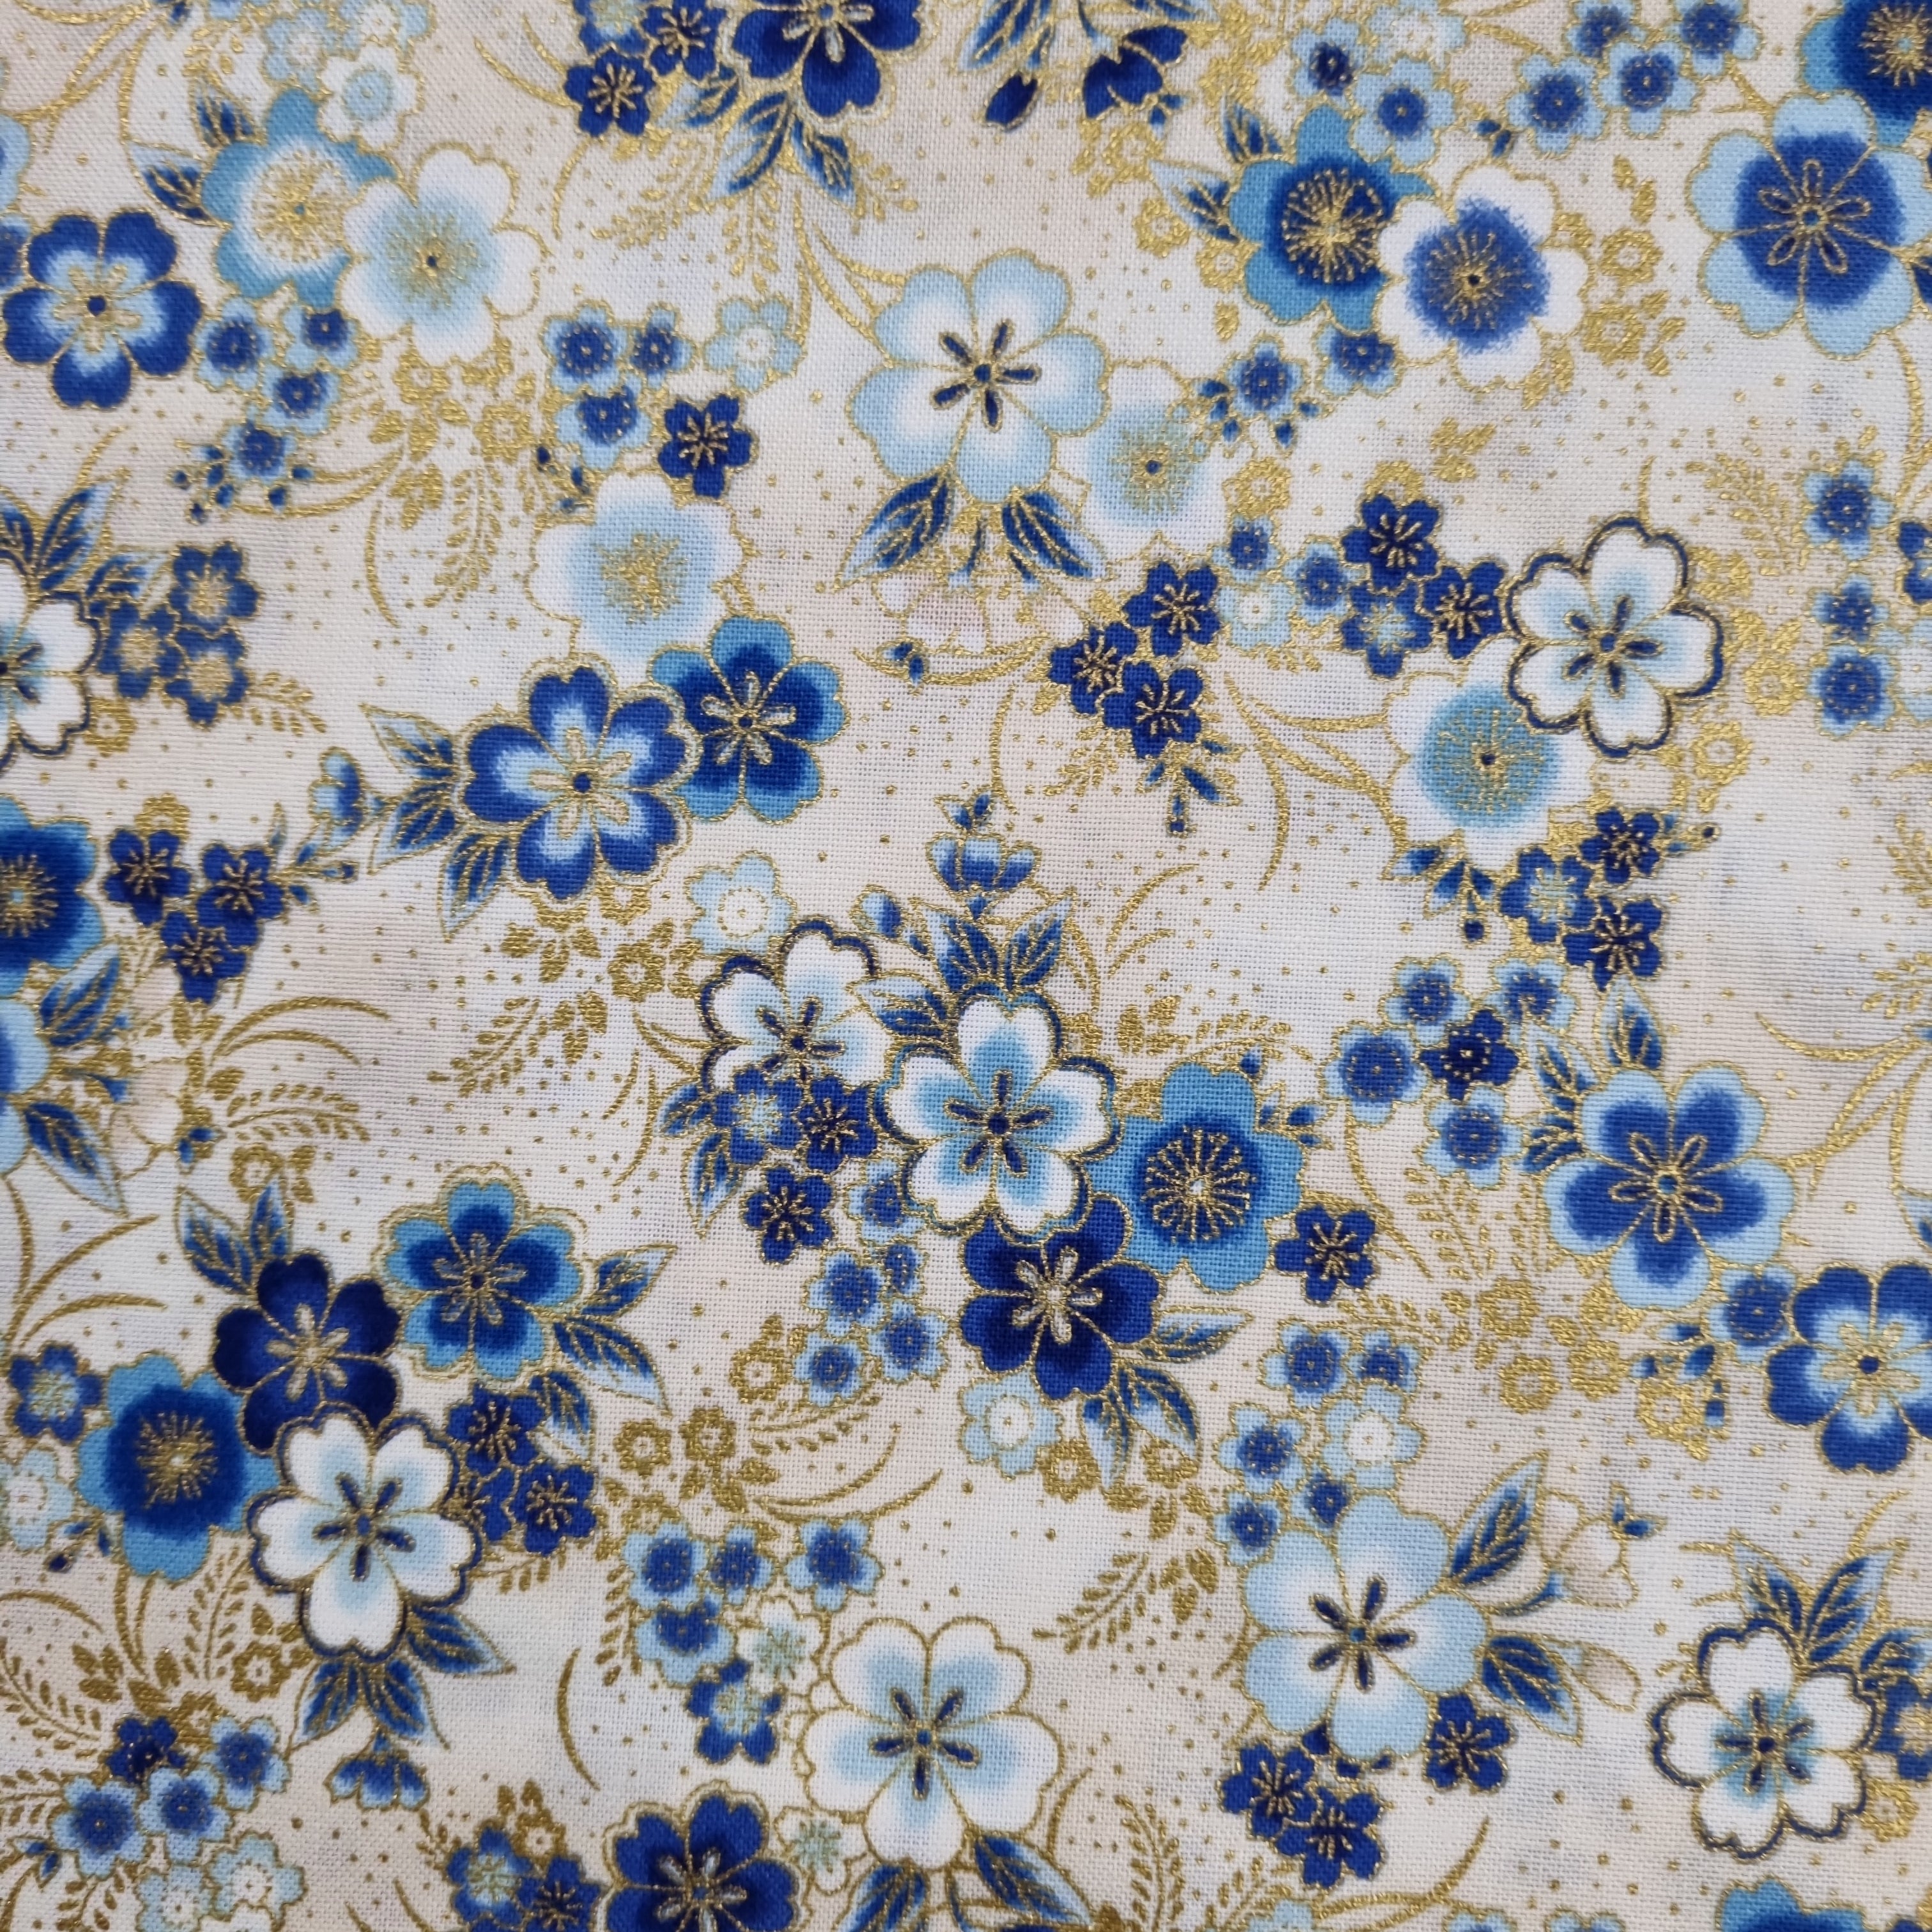 Imperial small flowers lgt blue